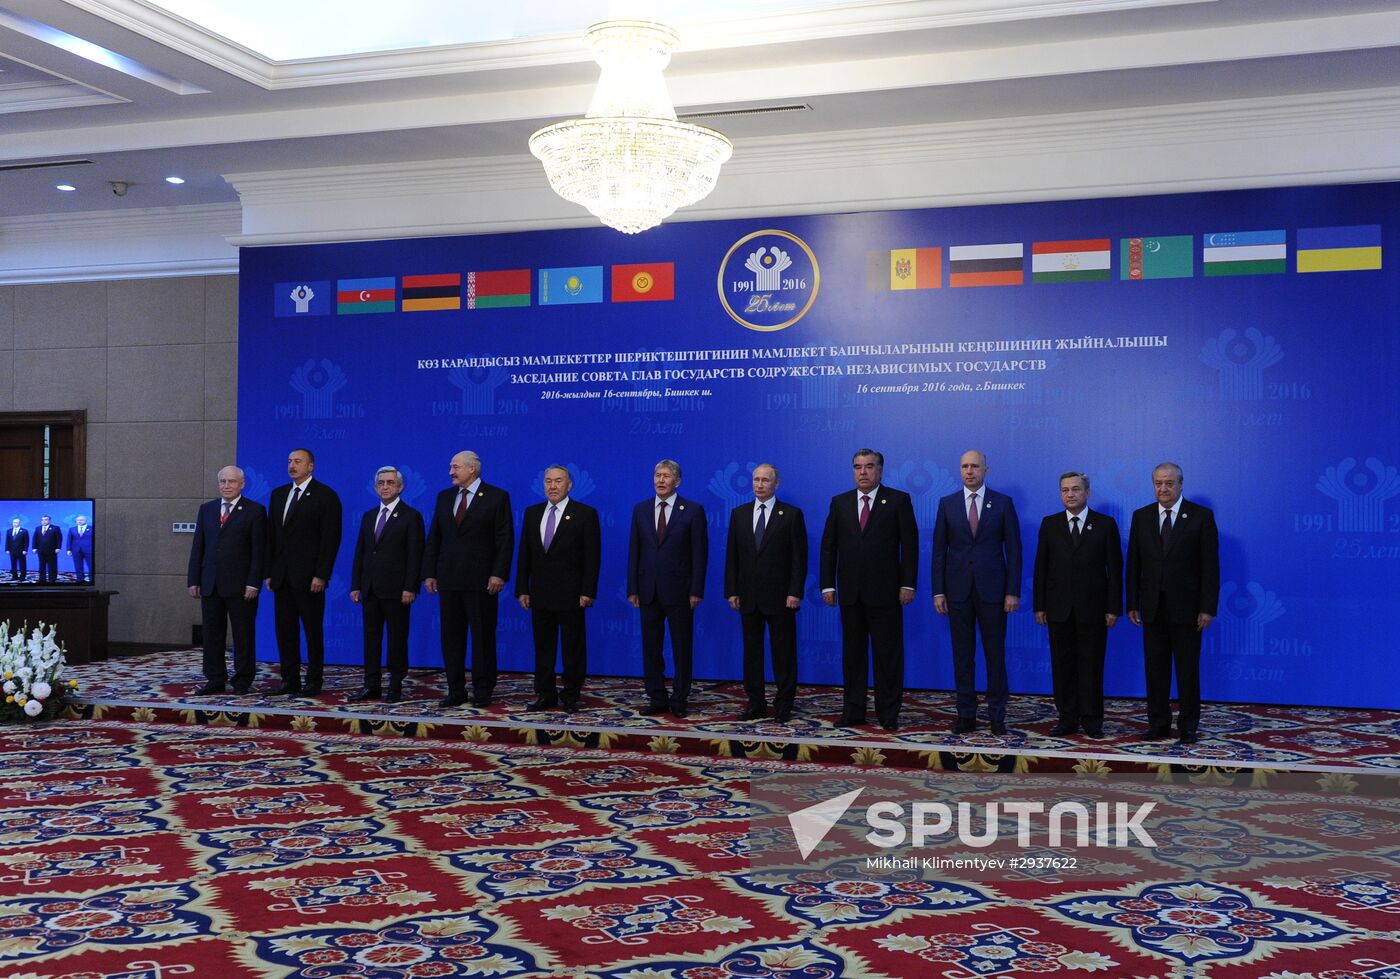 President Putin attends meeting of CIS Council of Heads of State